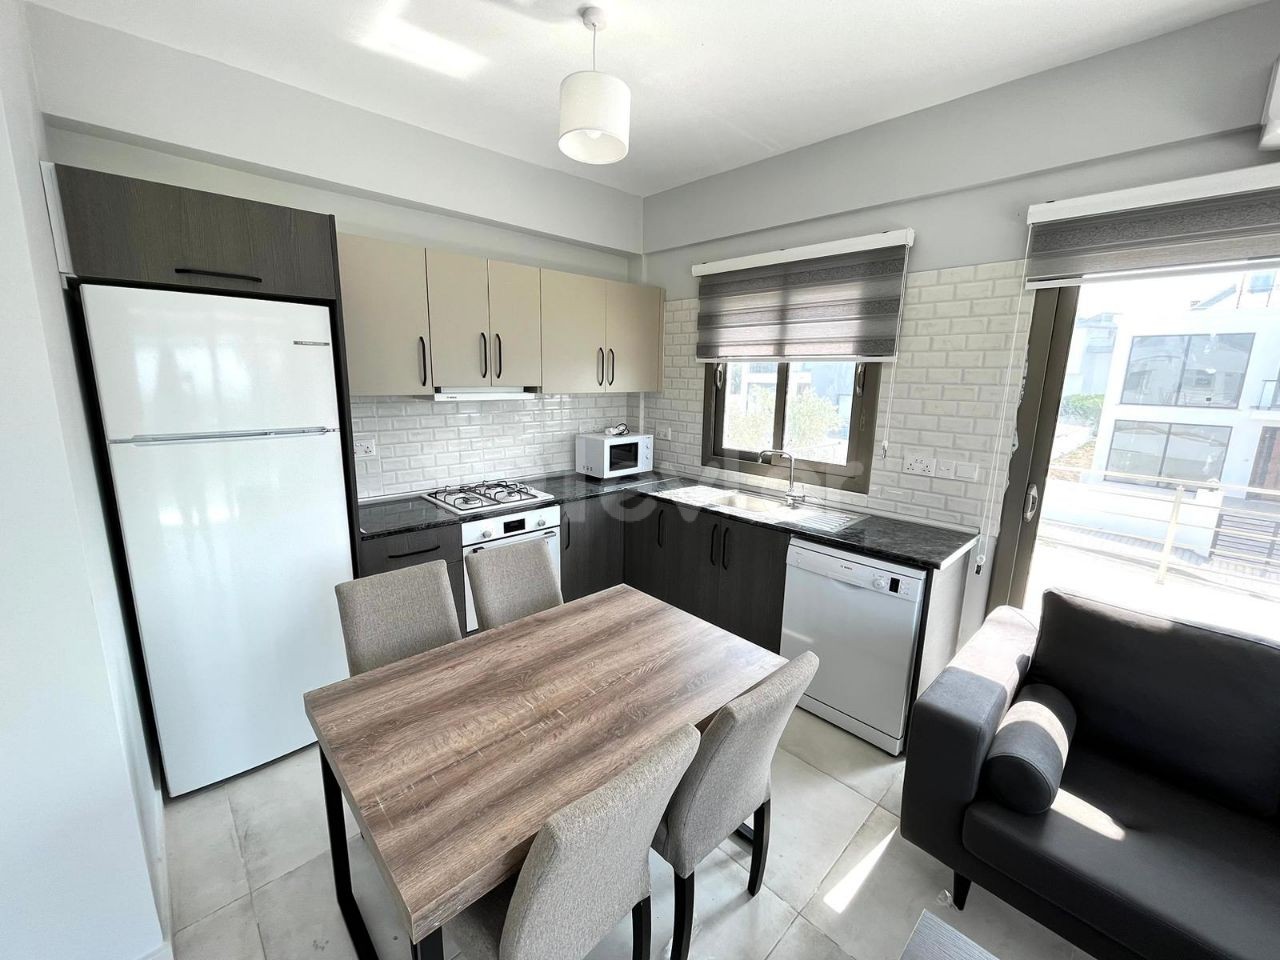 Brand new 3 bedroom apartment for rent in Catalkoy, Kyrenia  